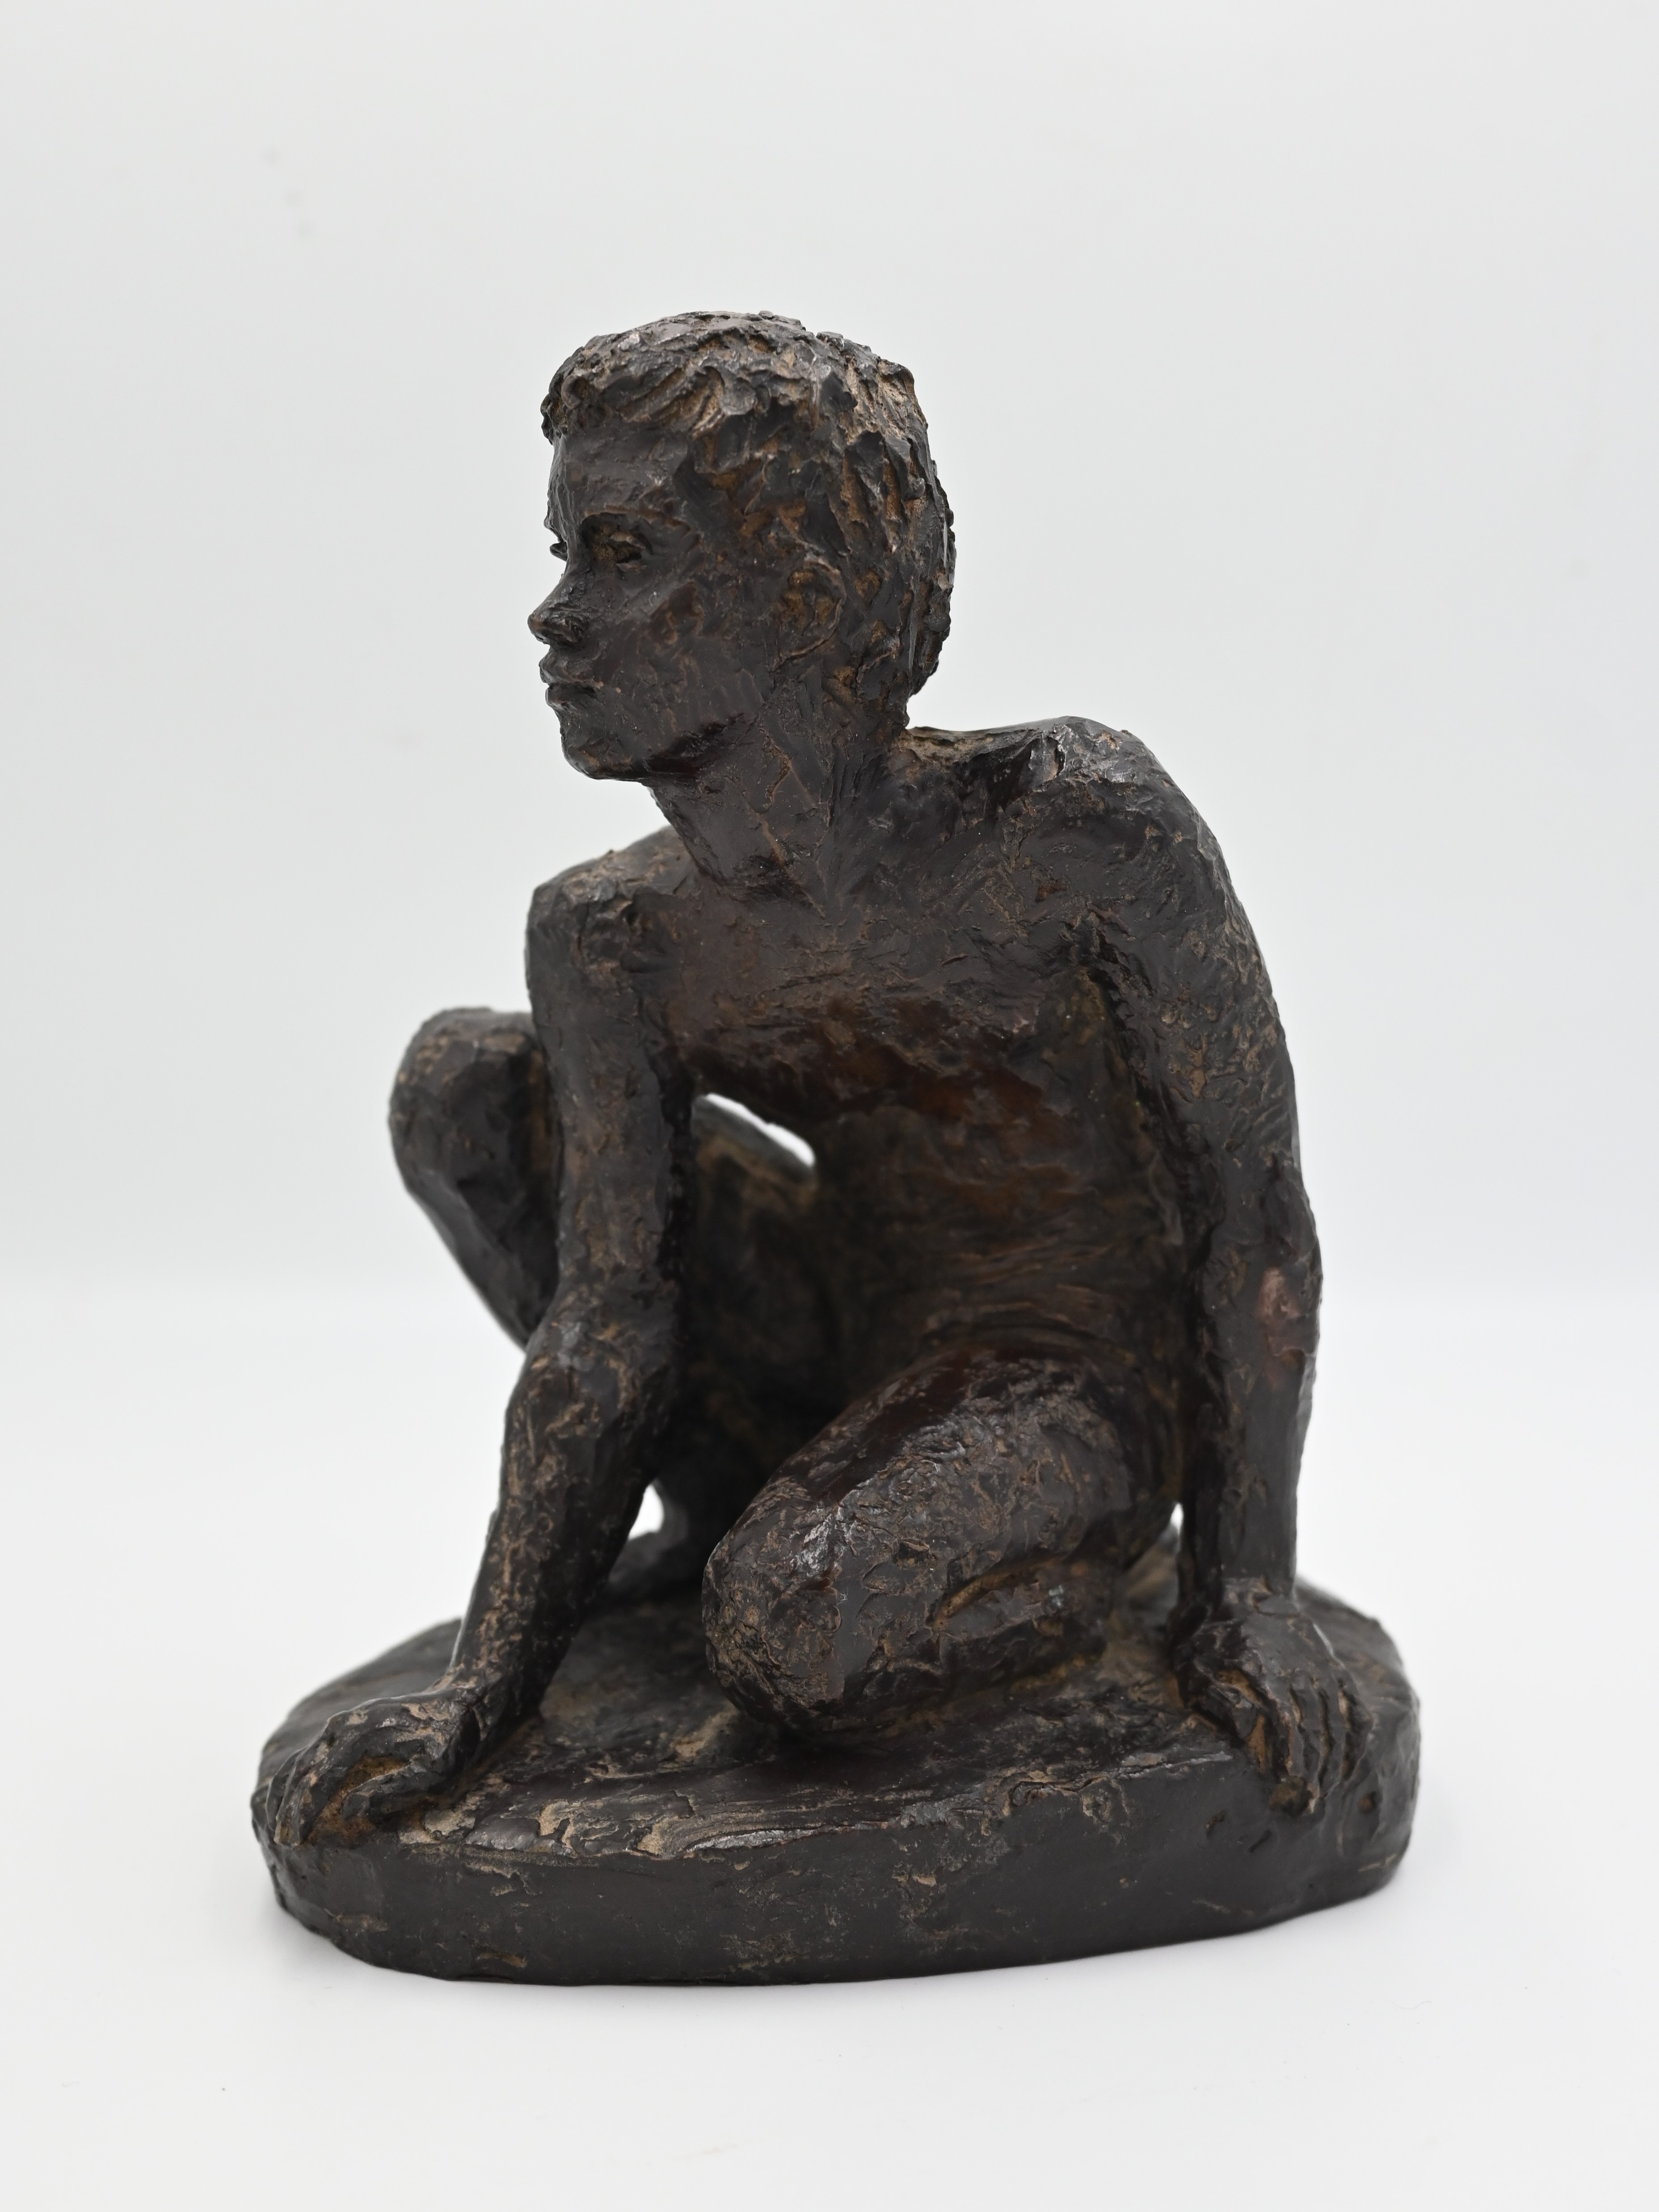 Karin Jonzen RBA FRBS, British 1914-1998 - Boy athlete; bronze resin, signed with initials on - Image 2 of 4